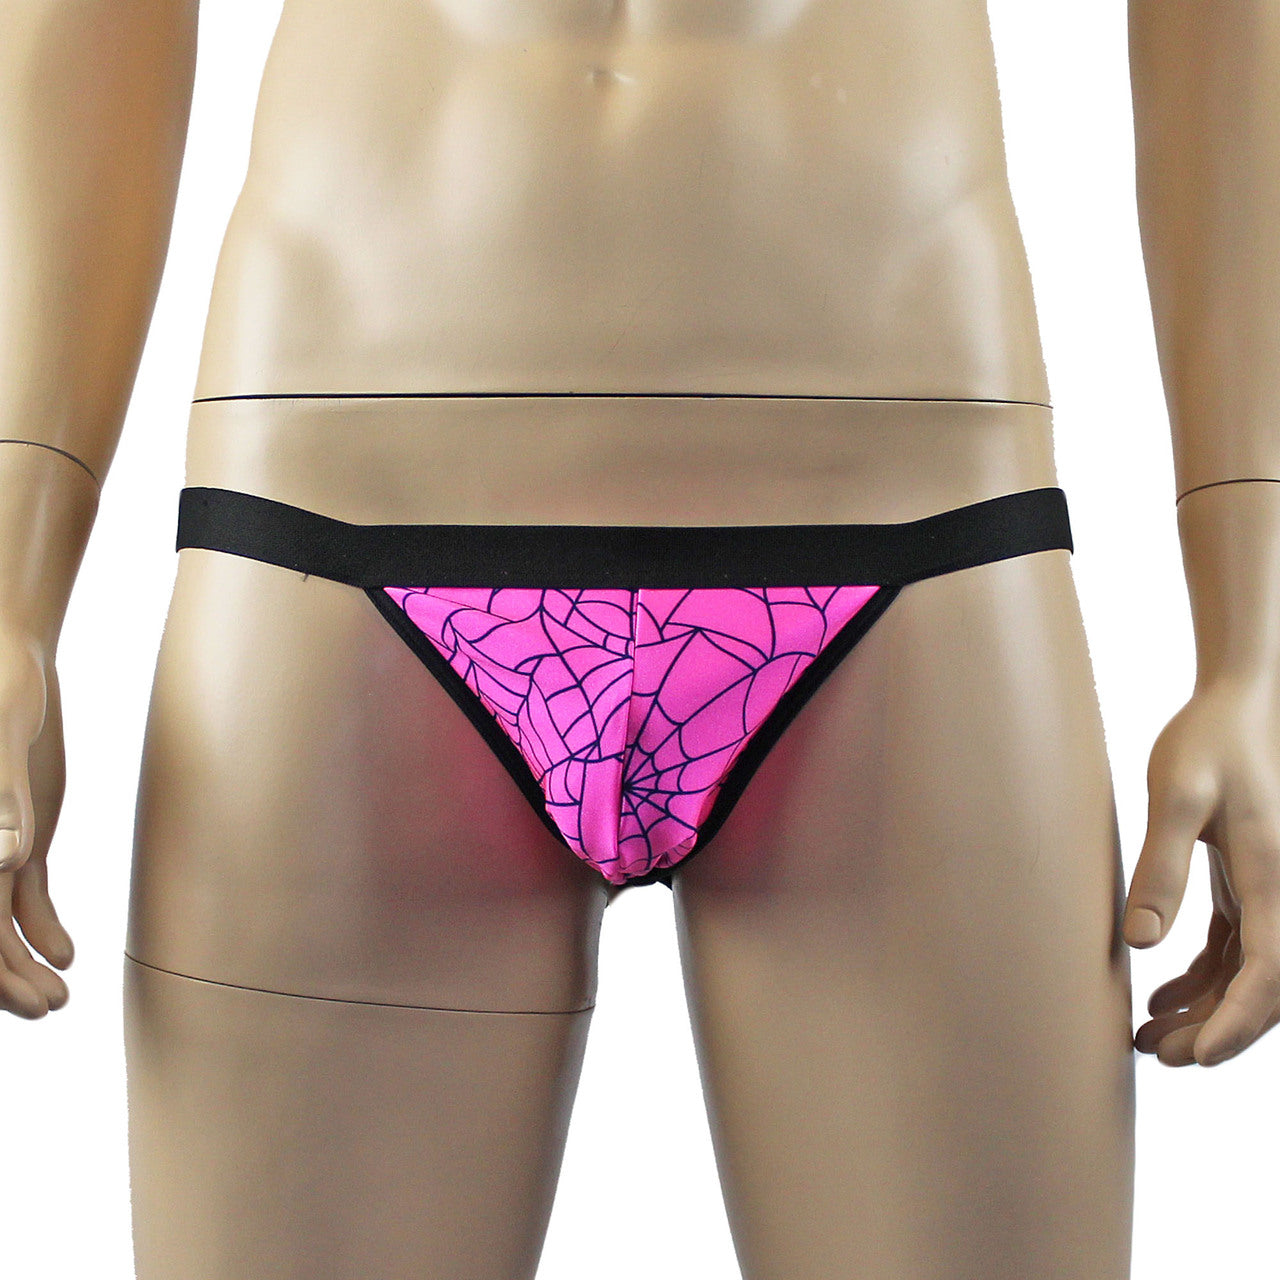 Mens Spider Web Mini Jock Strap with Band Lime Green or Hot Pink